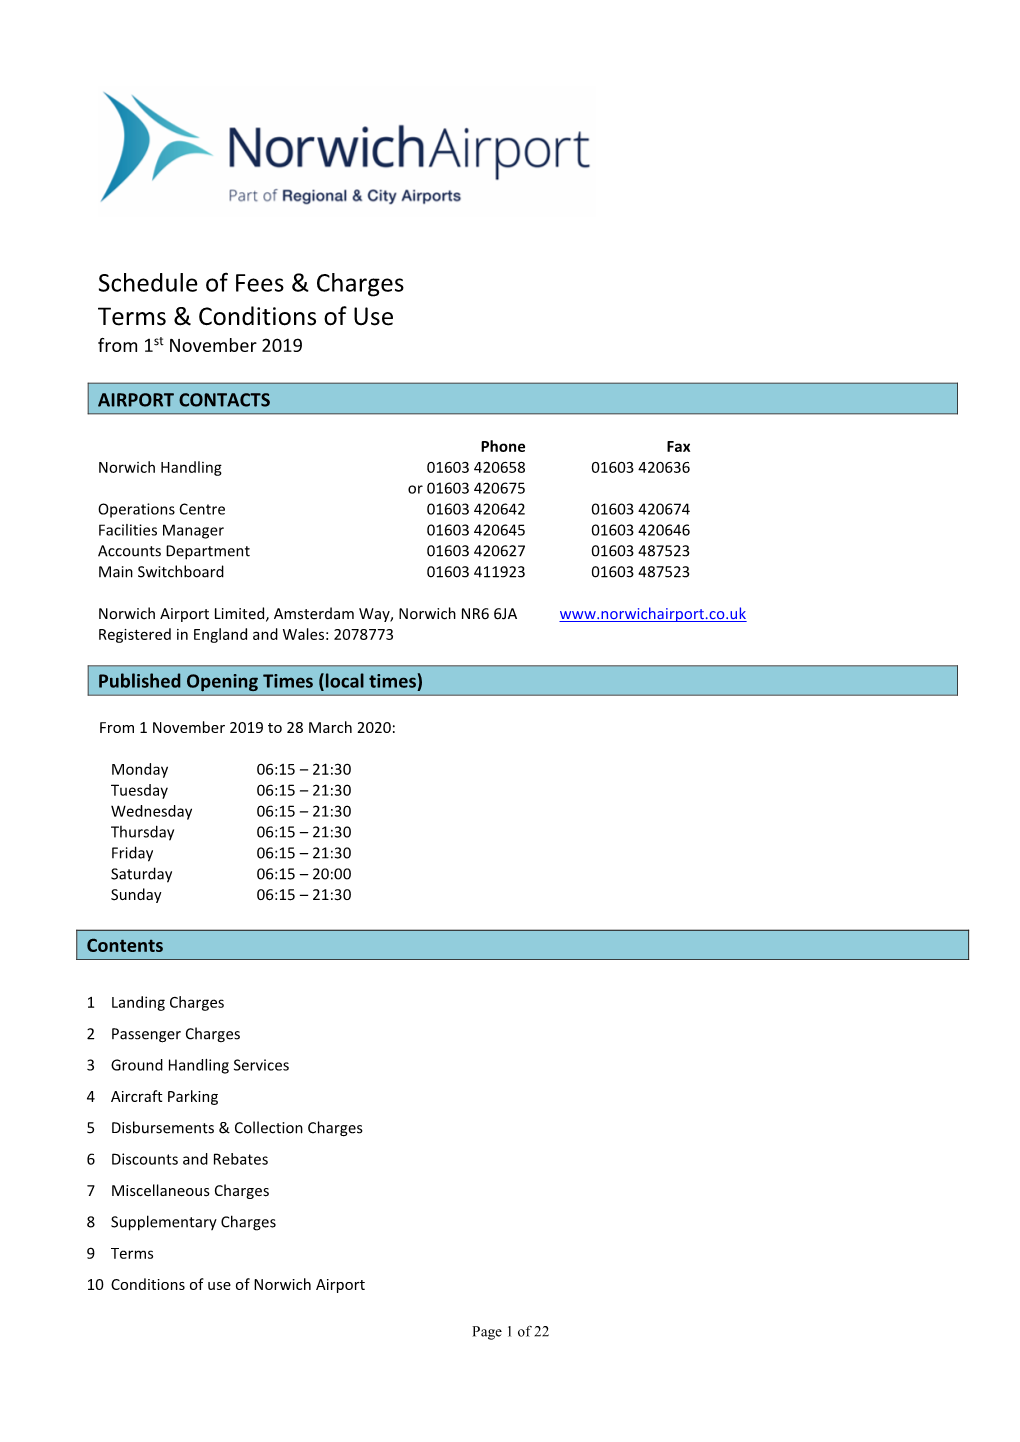 Charges & Fees Booklet